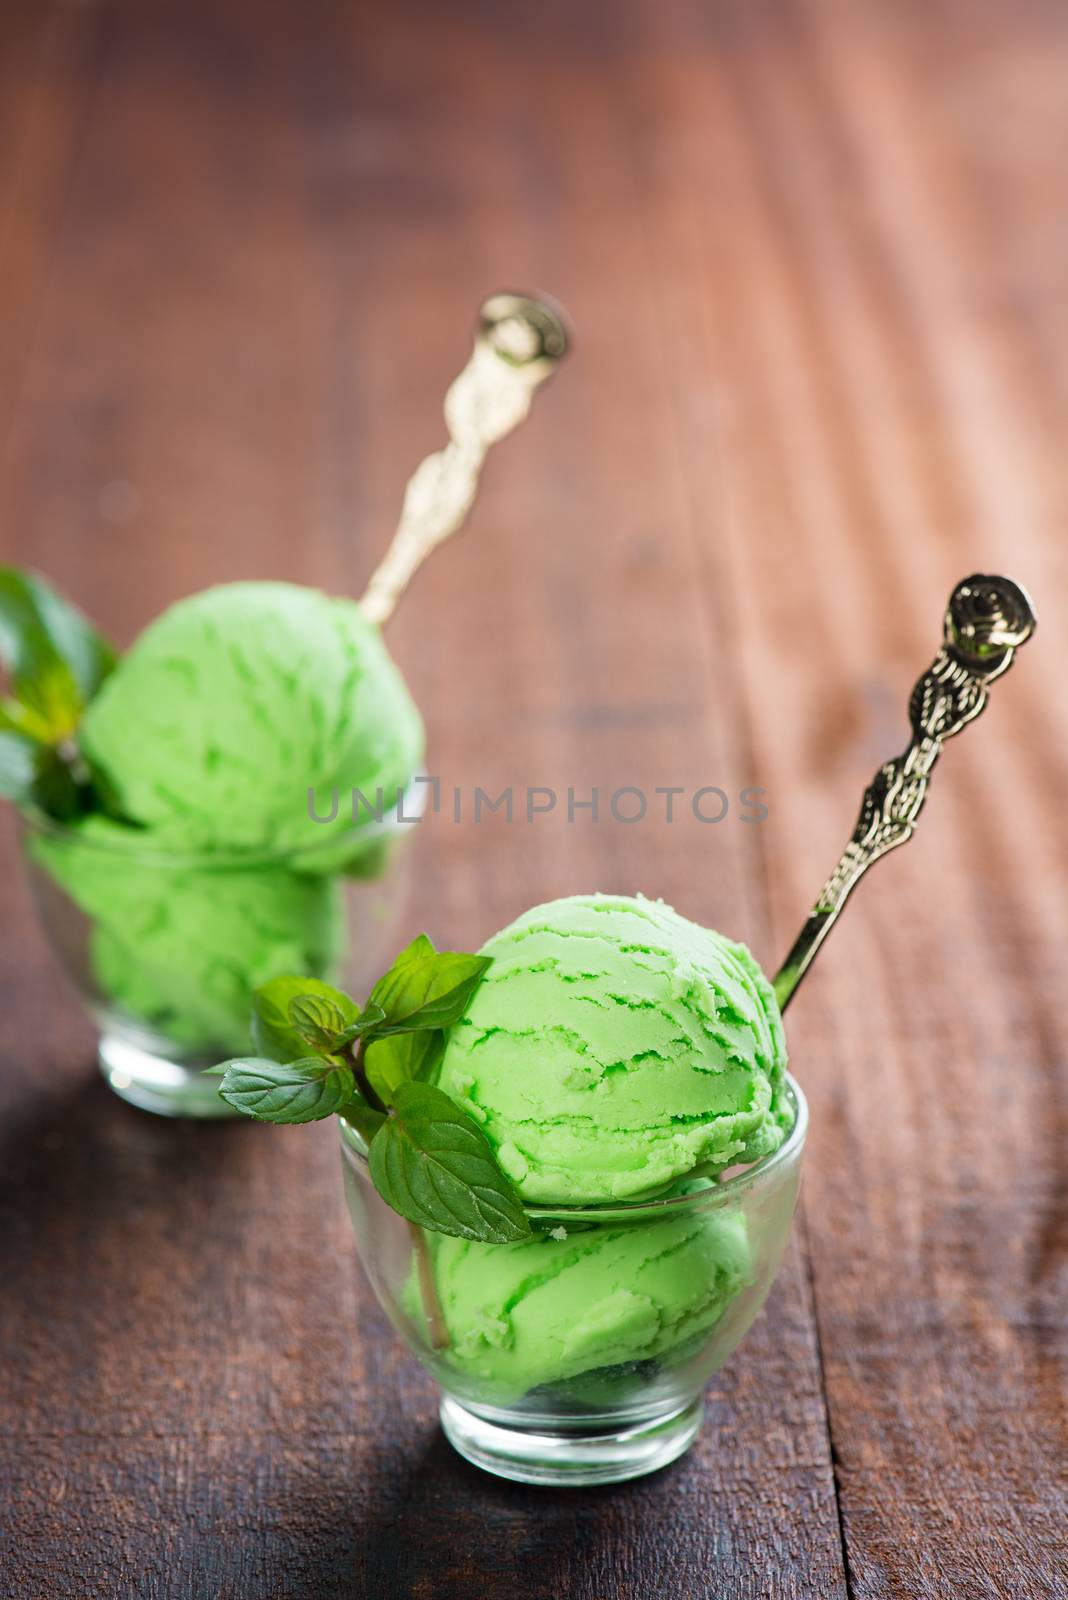 Mint ice cream in cup on dining table.